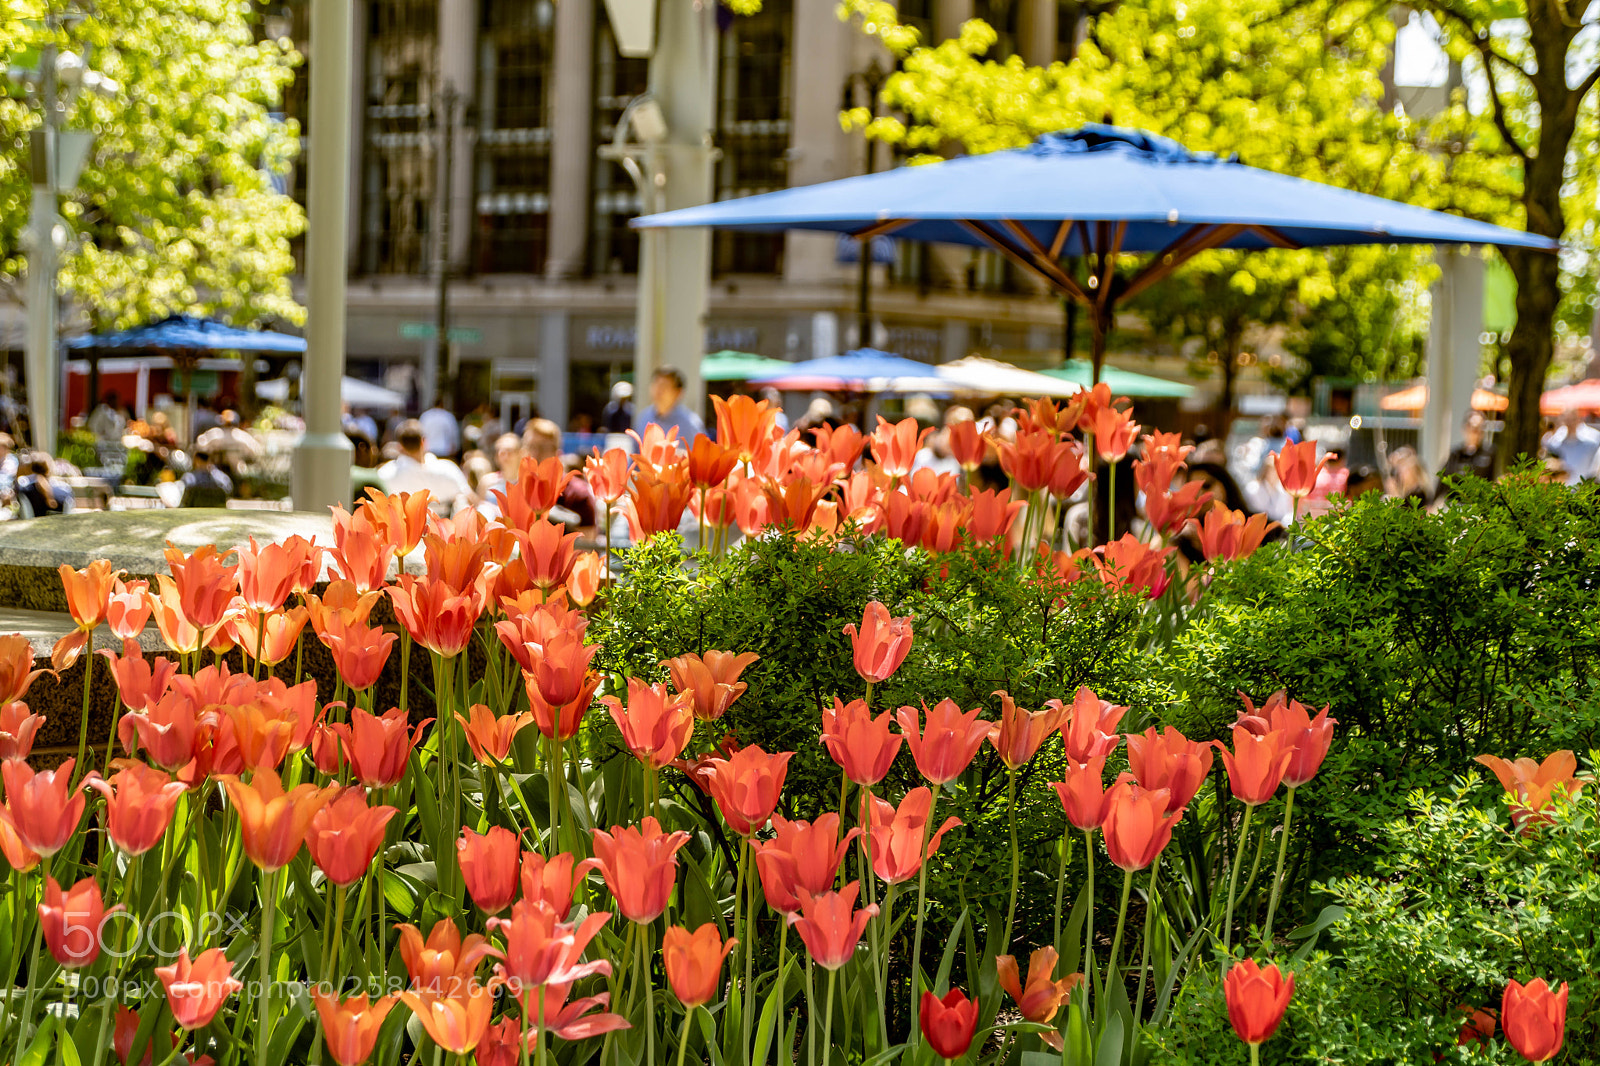 Sony a7 III sample photo. Flowers at campus martius photography